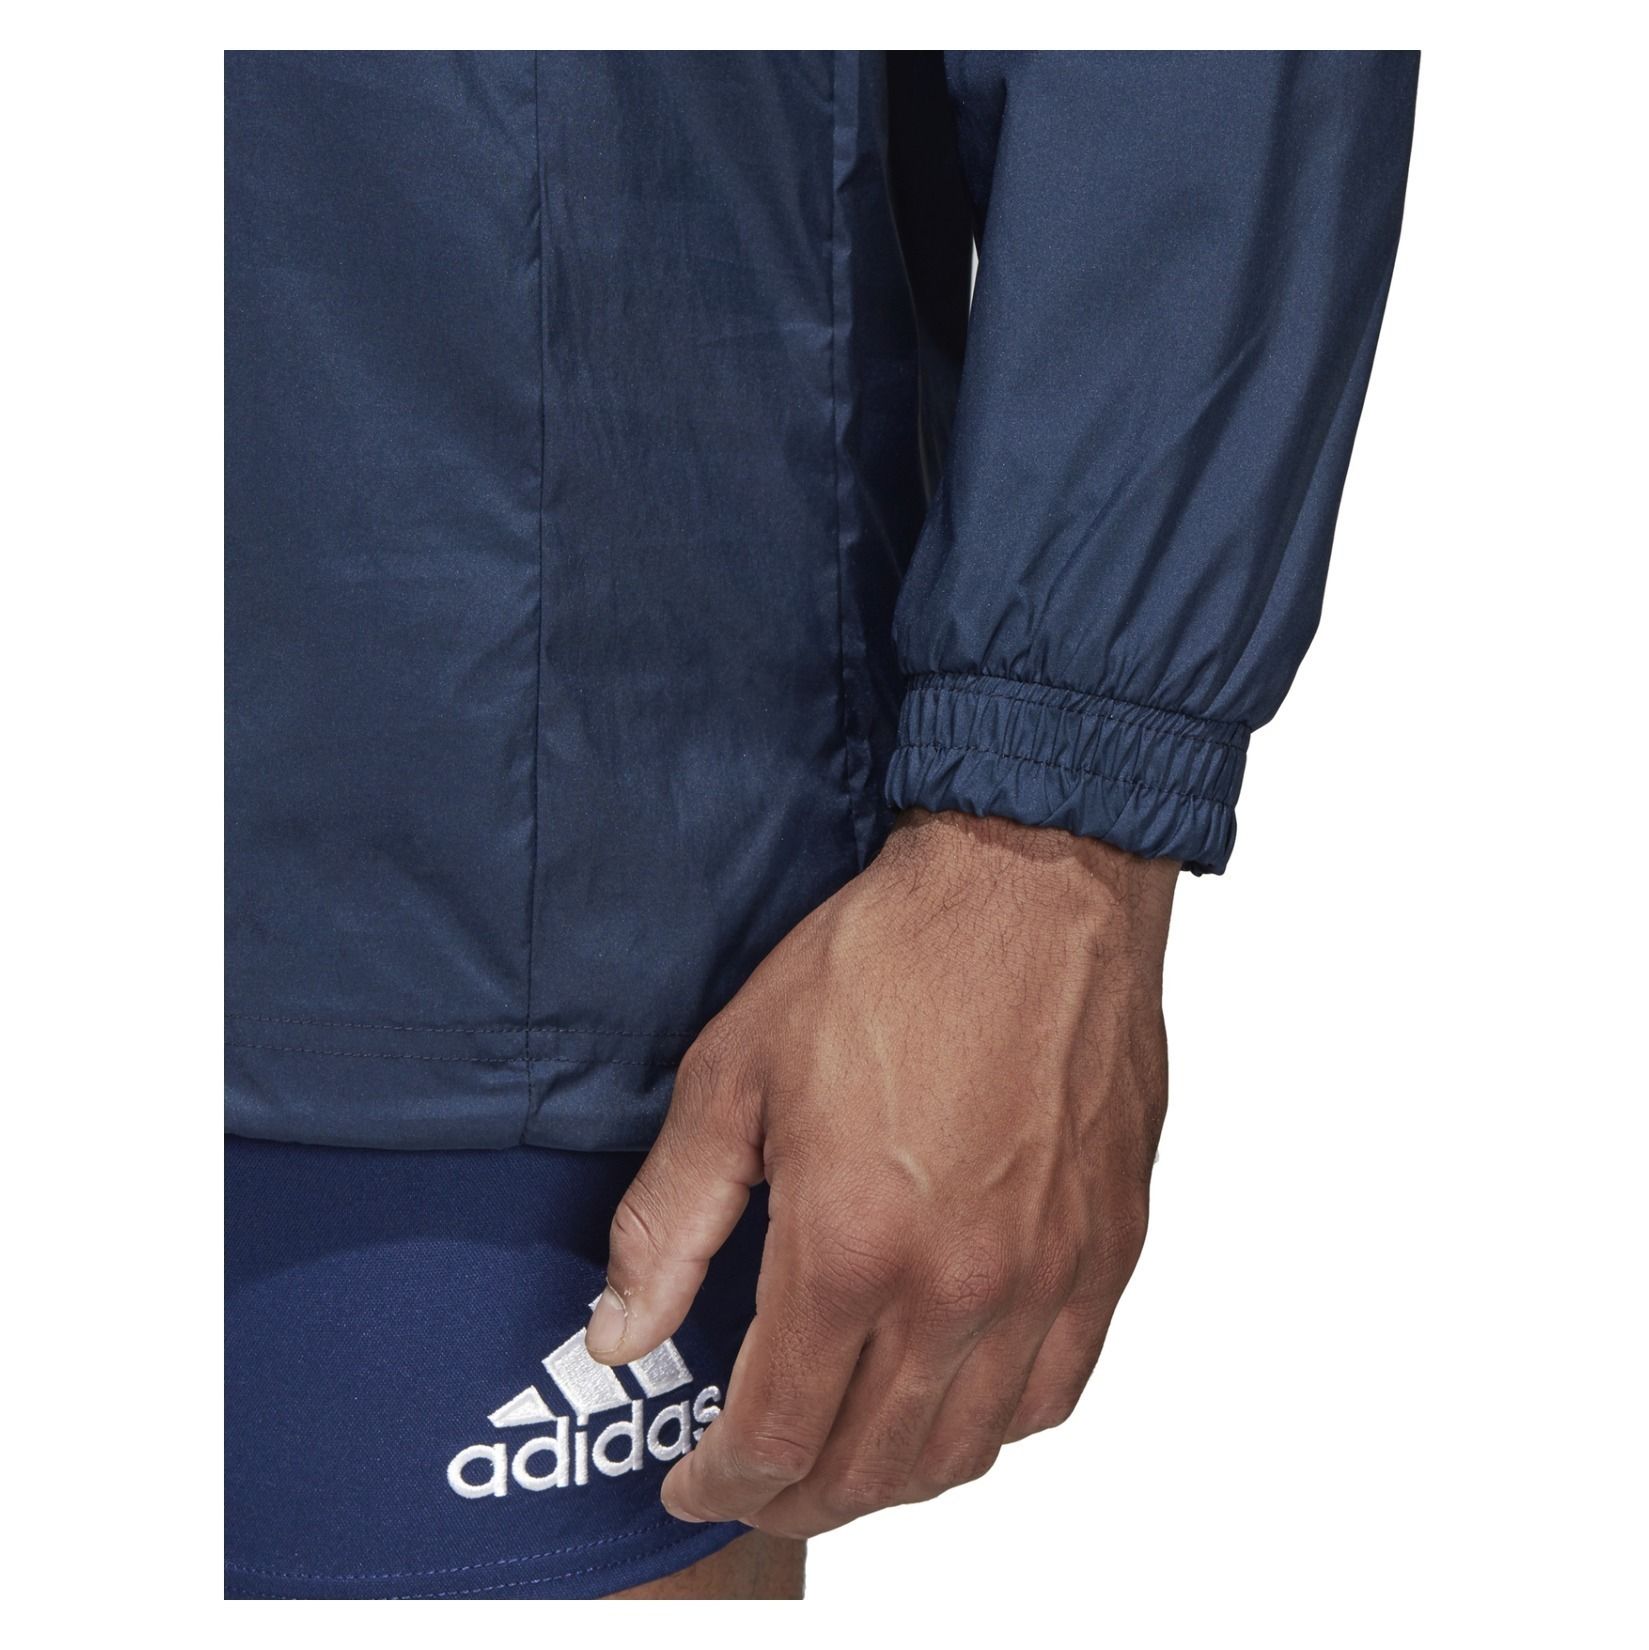 Adidas Rugby Contact Top